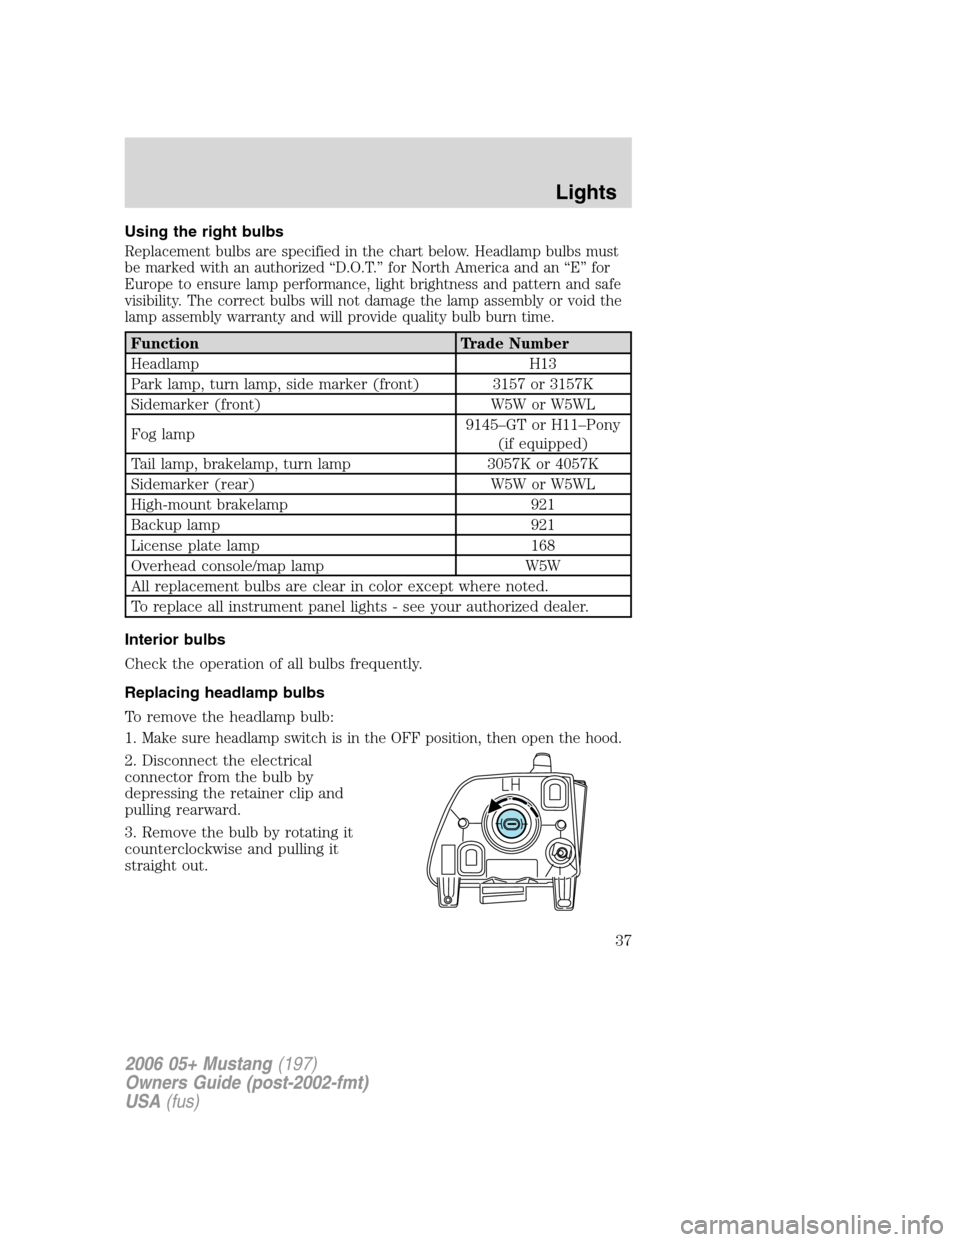 FORD MUSTANG 2006 5.G Owners Manual Using the right bulbs
Replacement bulbs are specified in the chart below. Headlamp bulbs must
be marked with an authorized “D.O.T.” for North America and an “E” for
Europe to ensure lamp perfo